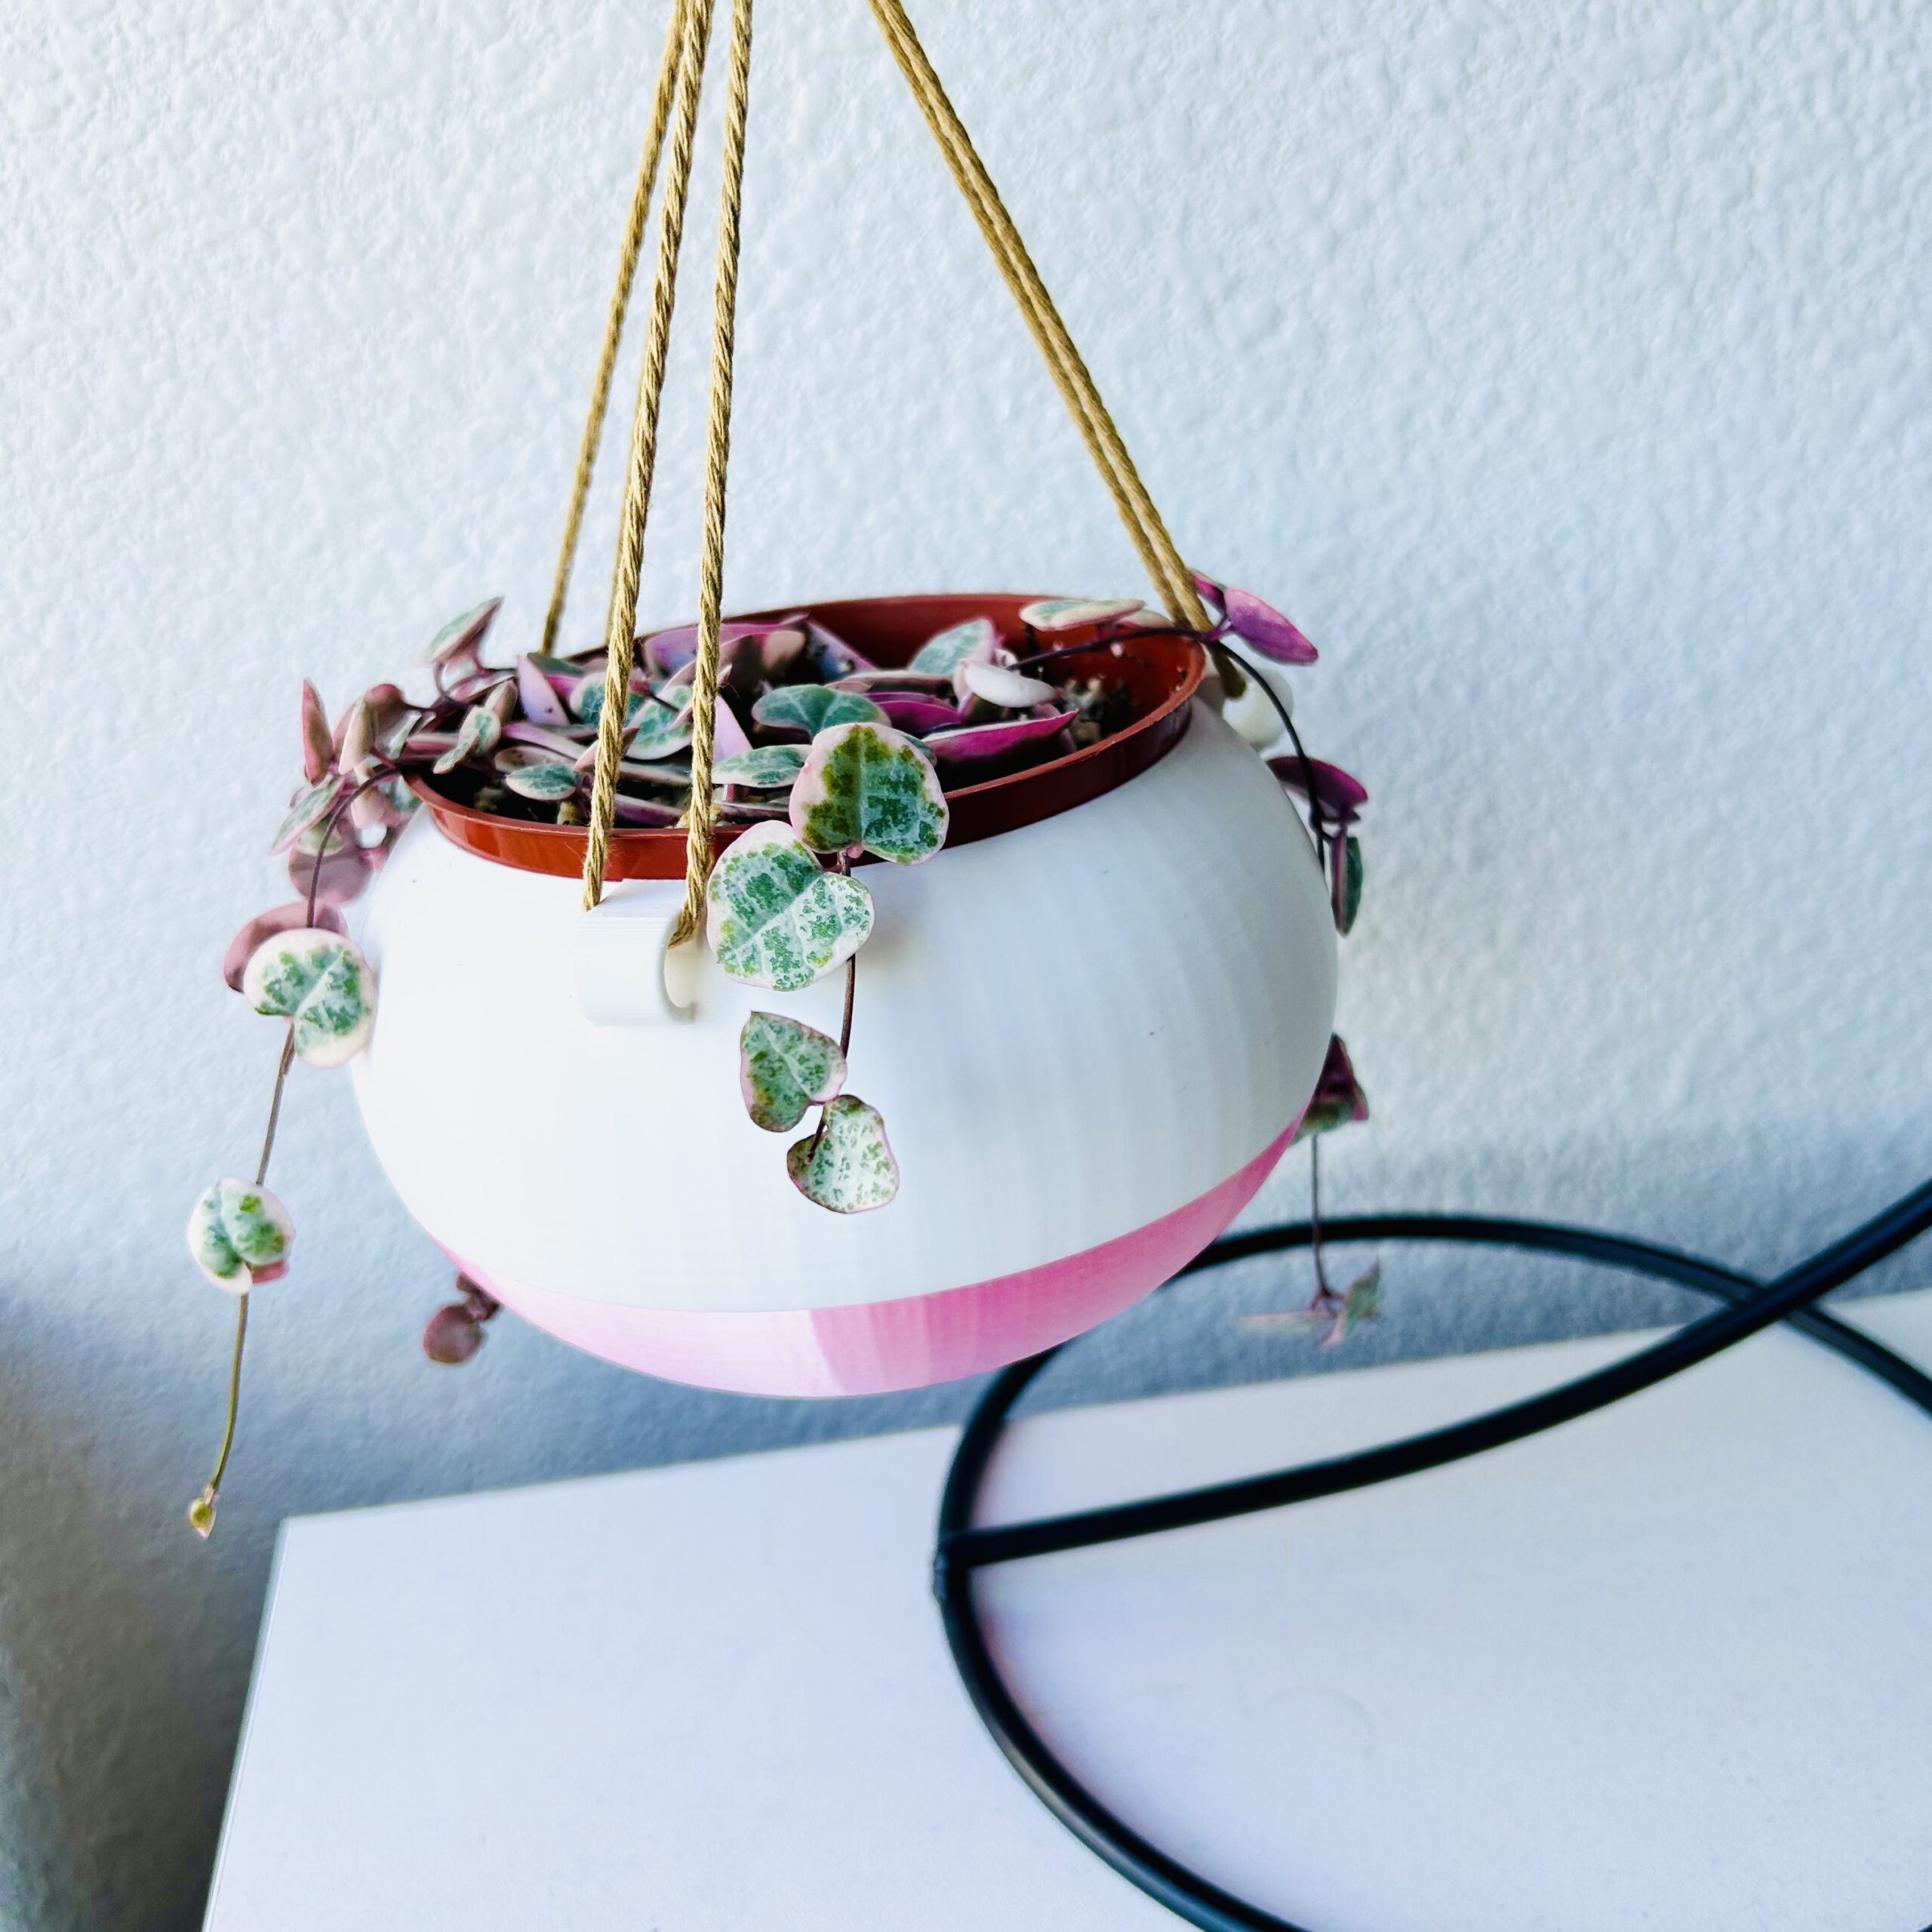 Hanging Cache Pot for 4 inch Nursery Pot